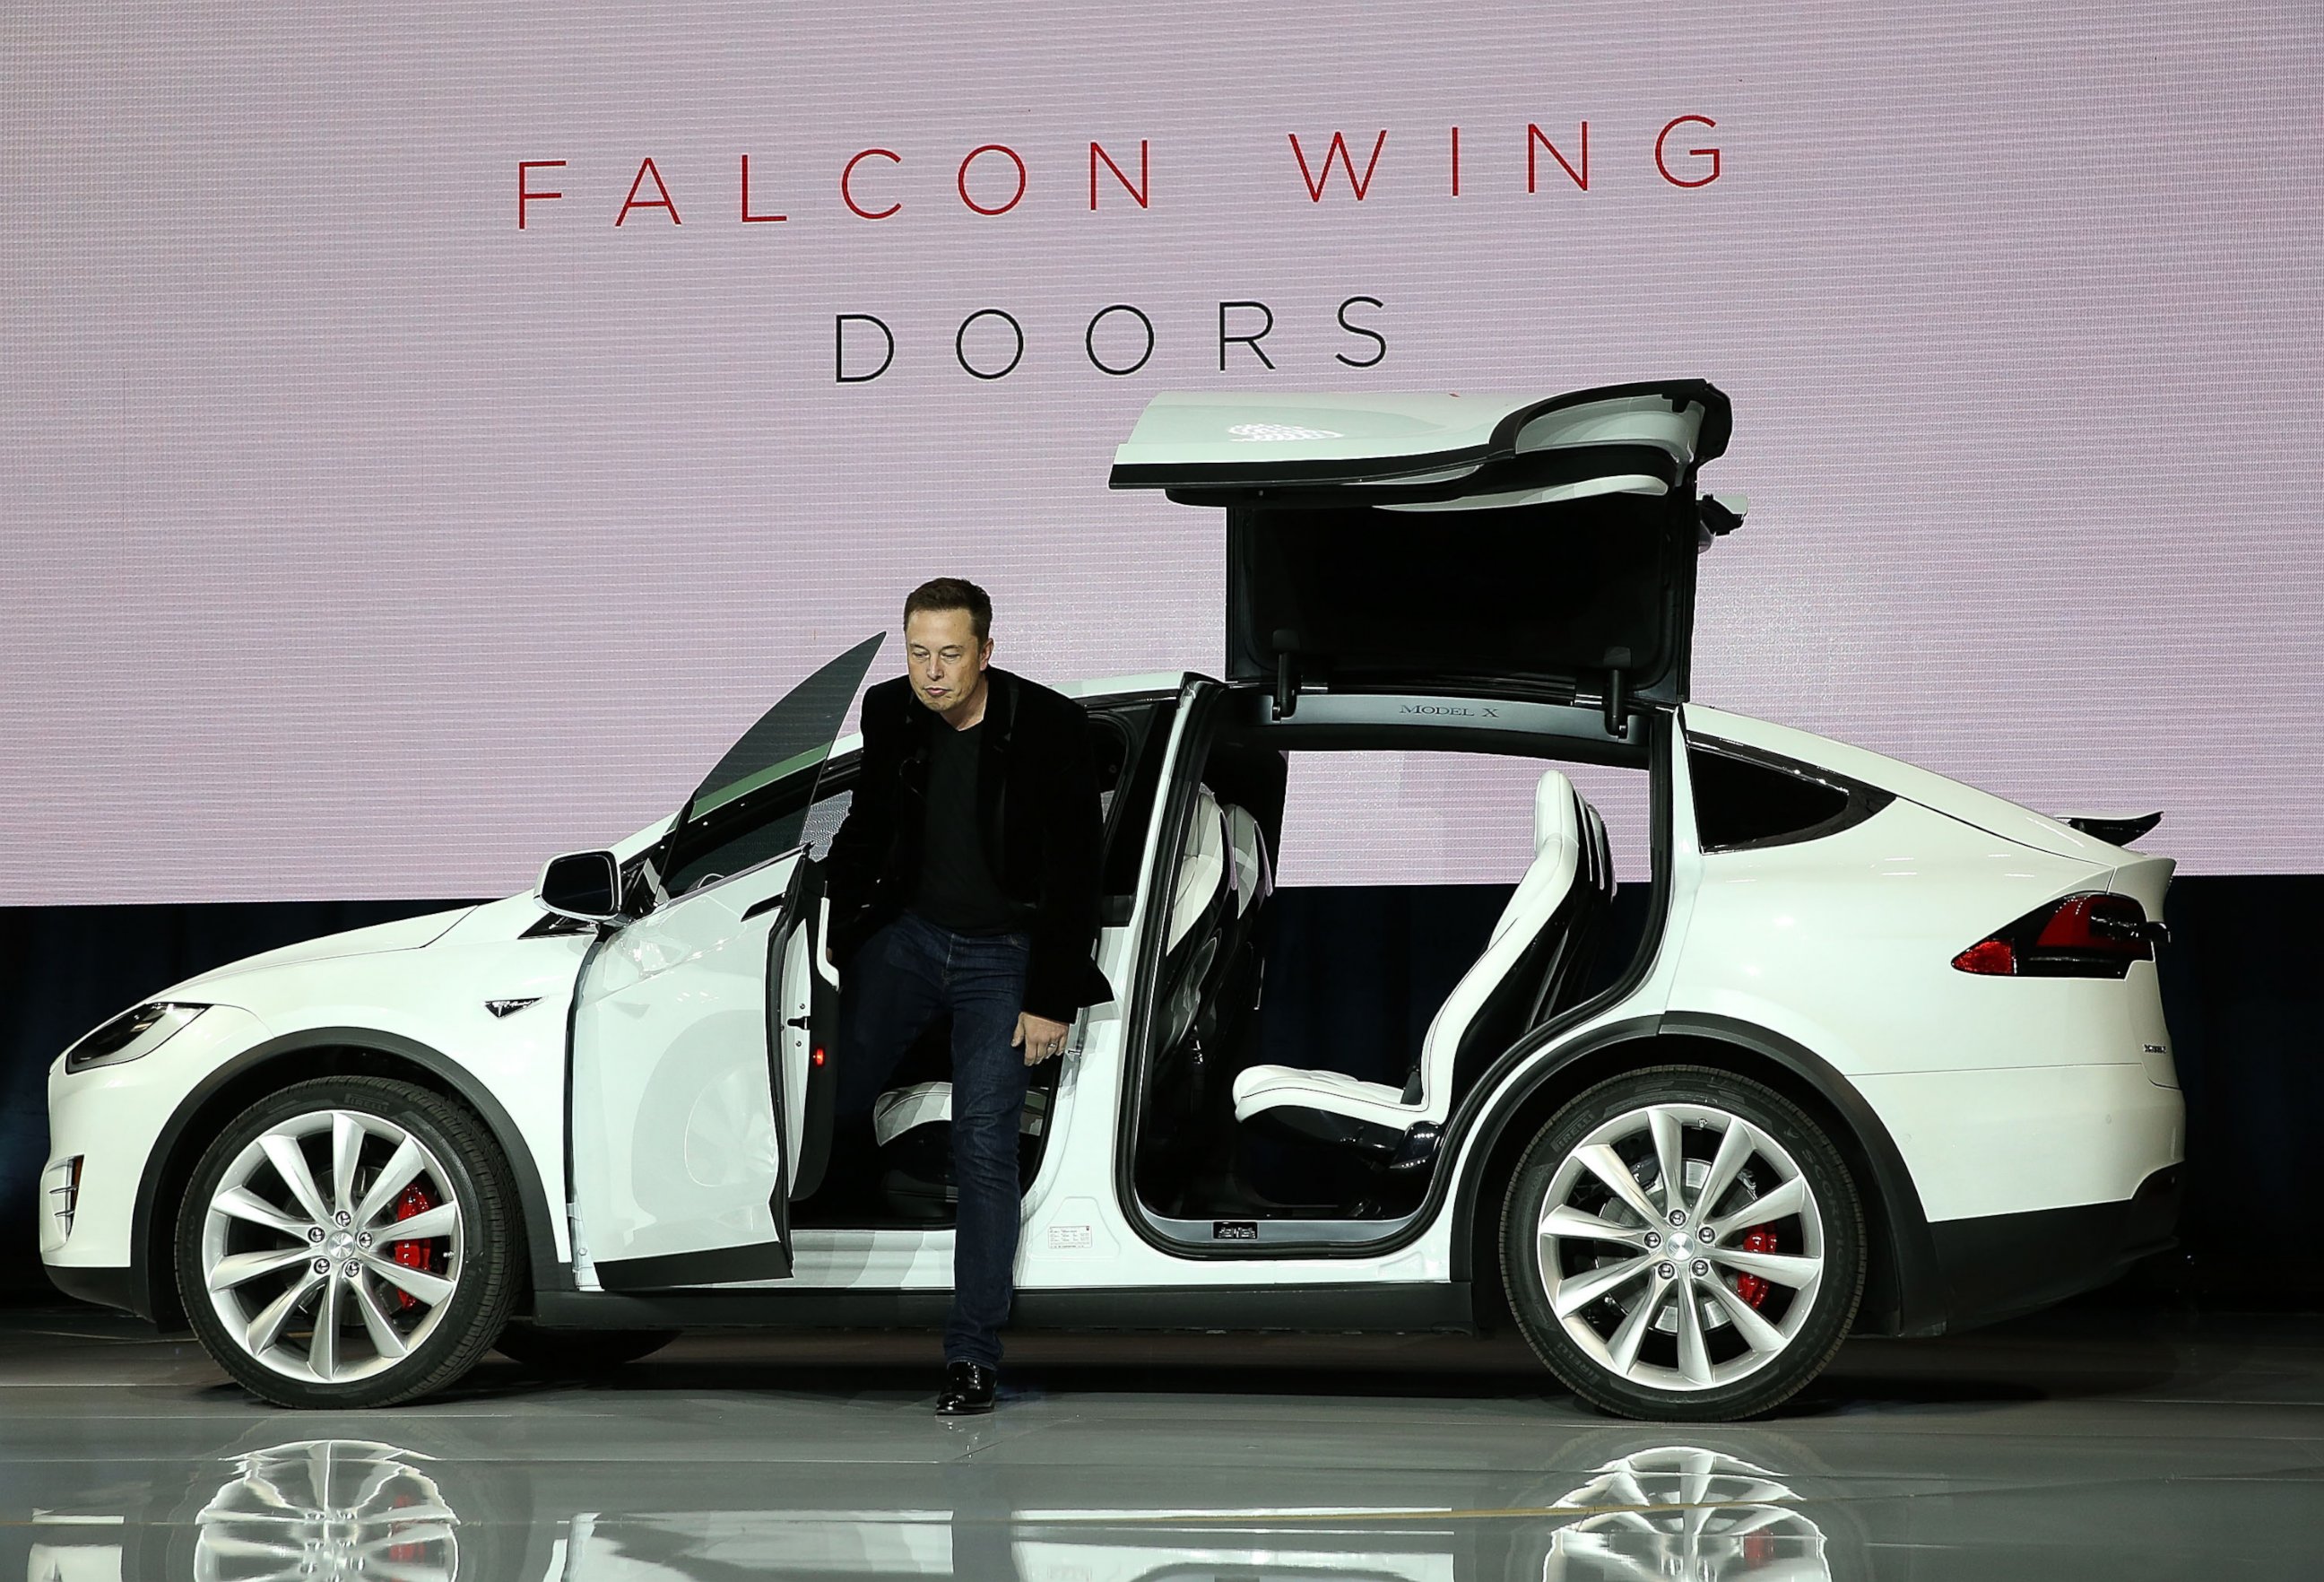 PHOTO: Elon Musk demonstrates the falcon wing doors on the new Tesla Model X Crossover SUV during a launch event on Sep. 29, 2015 in Fremont, California.